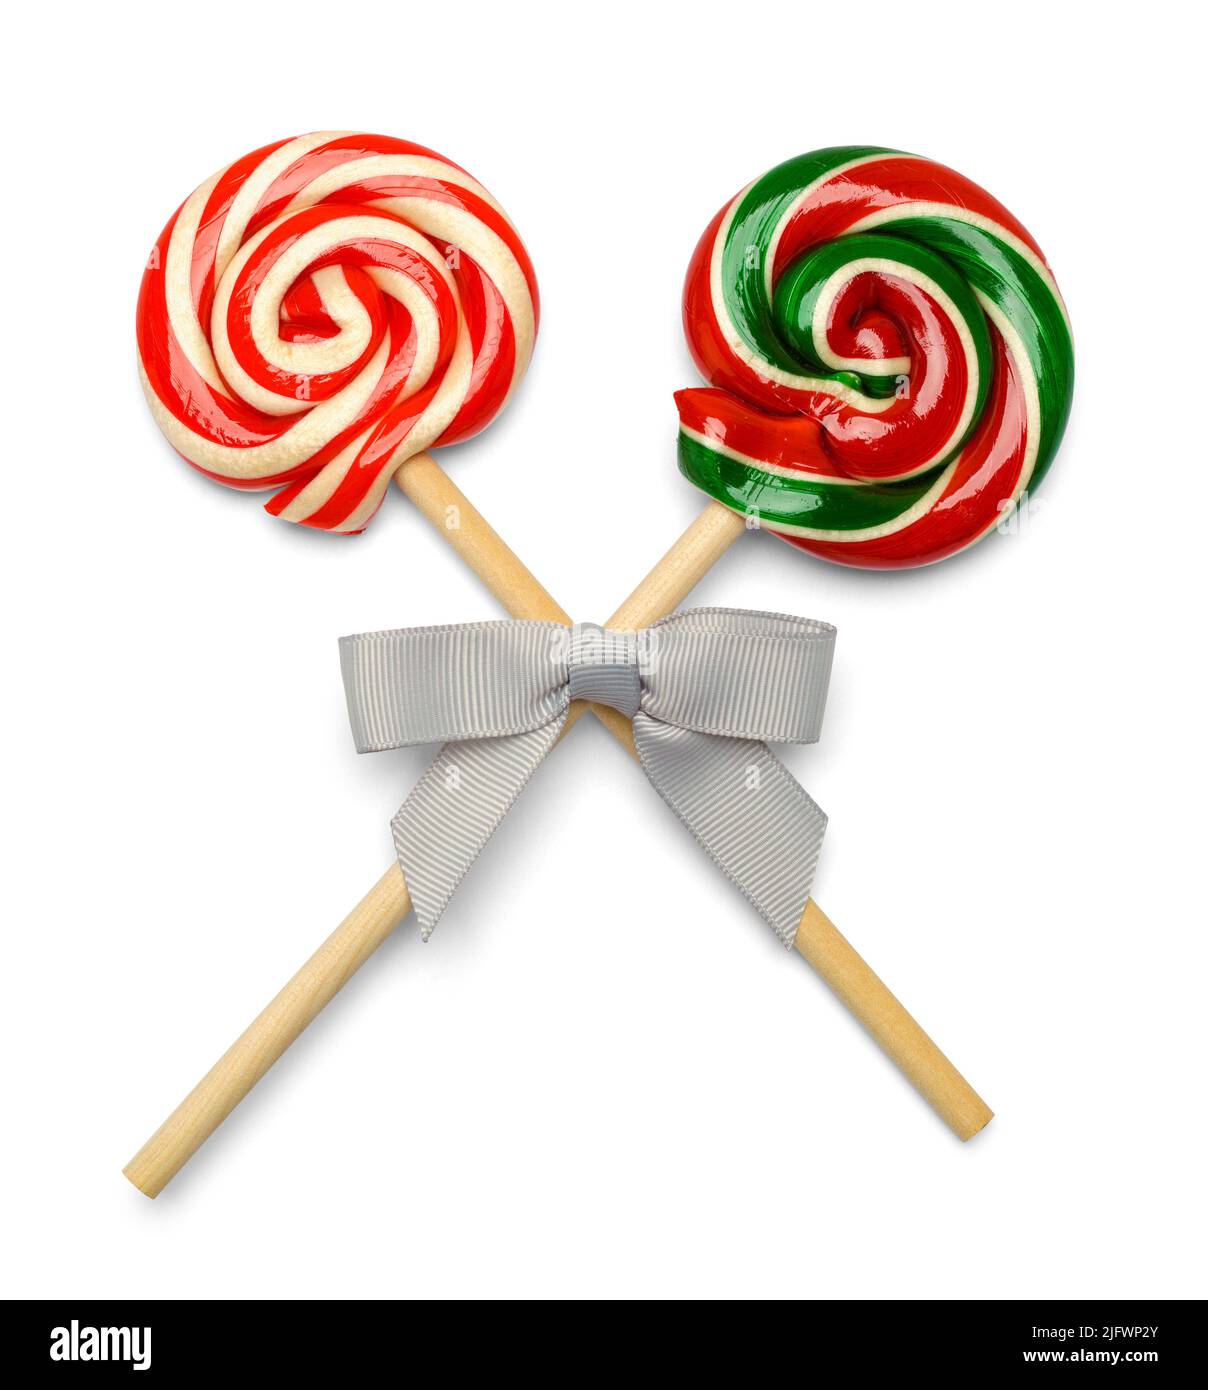 Two Peppermint Candy Cane Lollipops Cut Out on White. Stock Photo